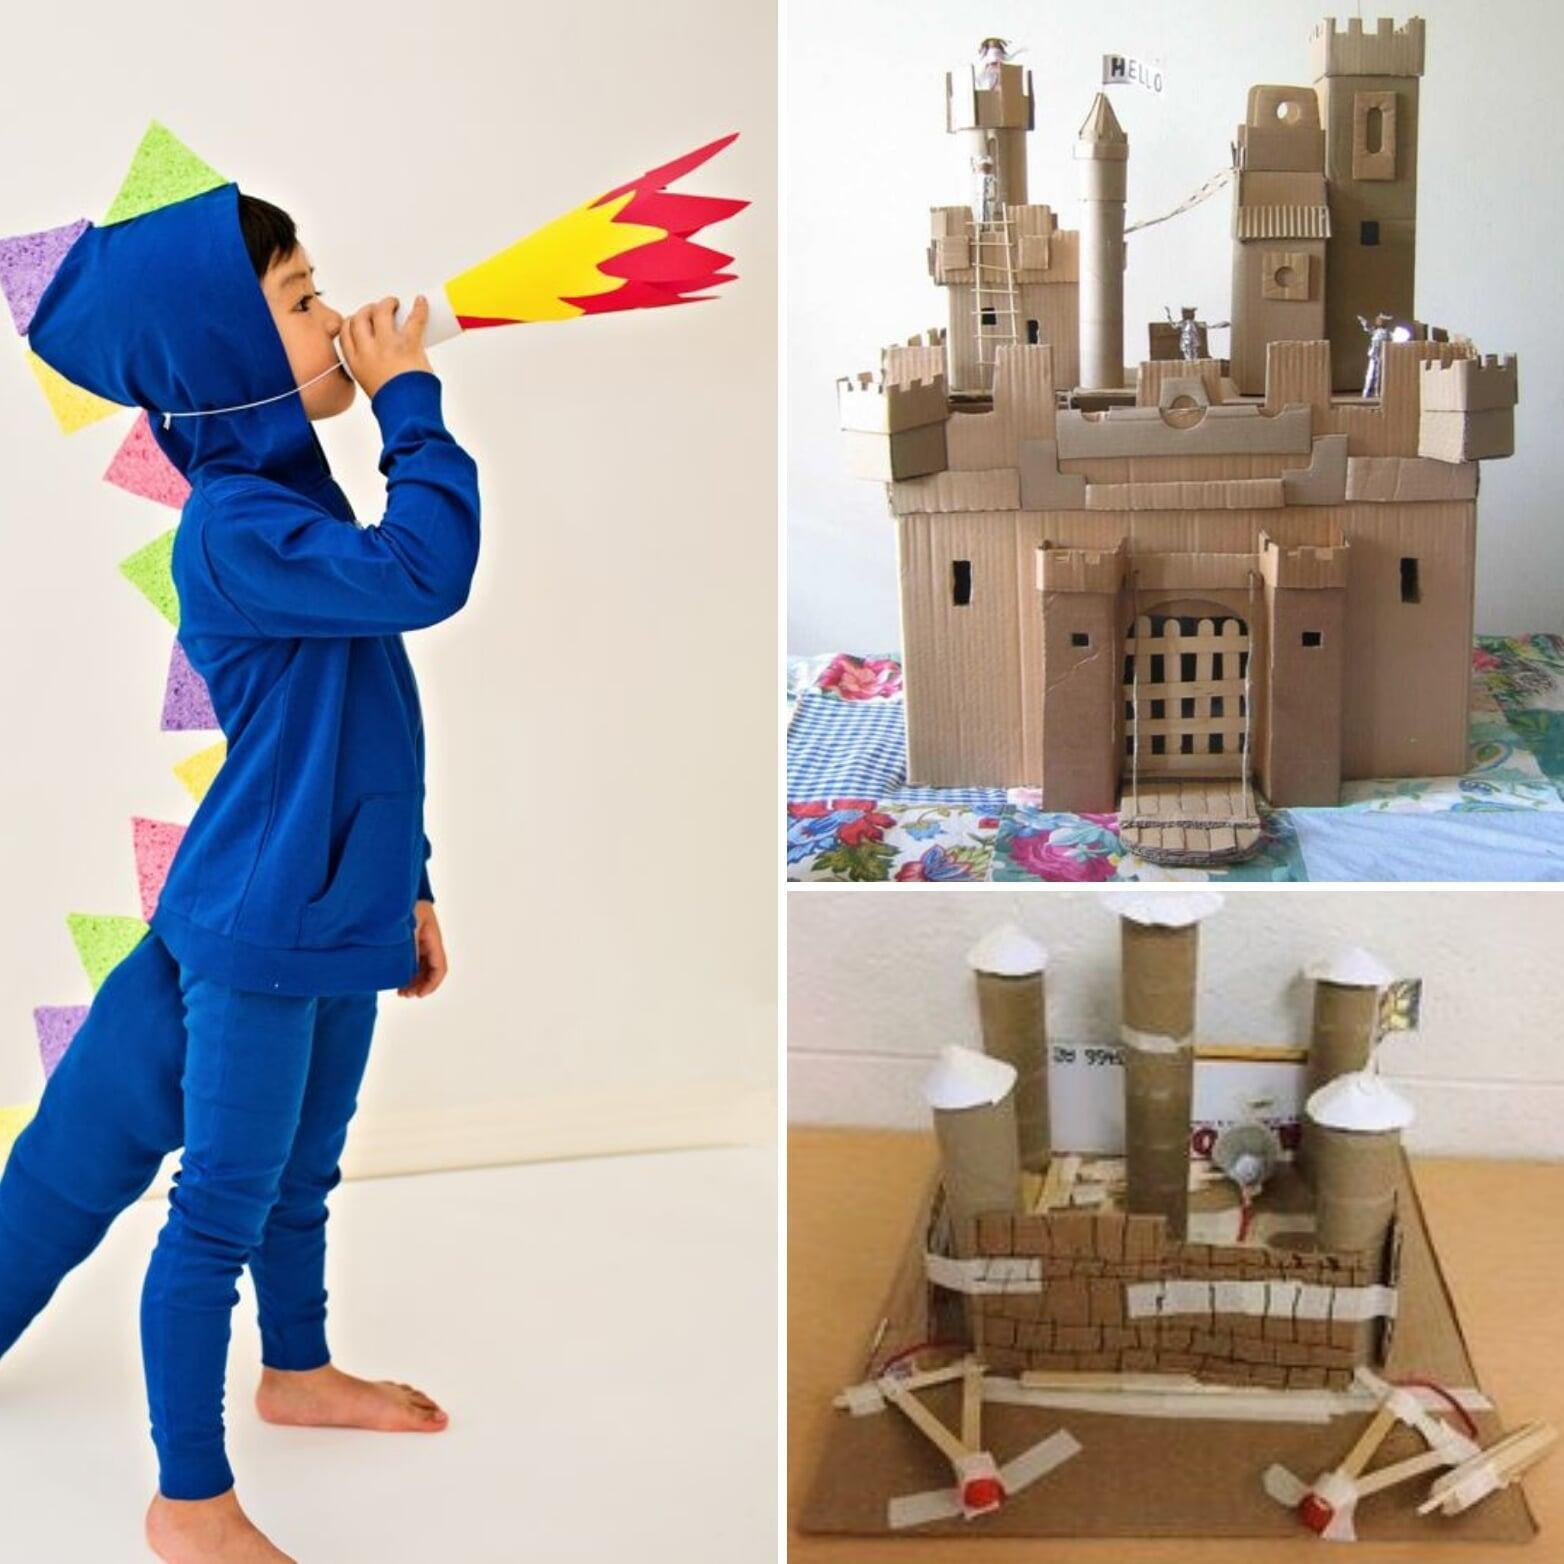 Child in home made dragon costume and examples of castle children have built